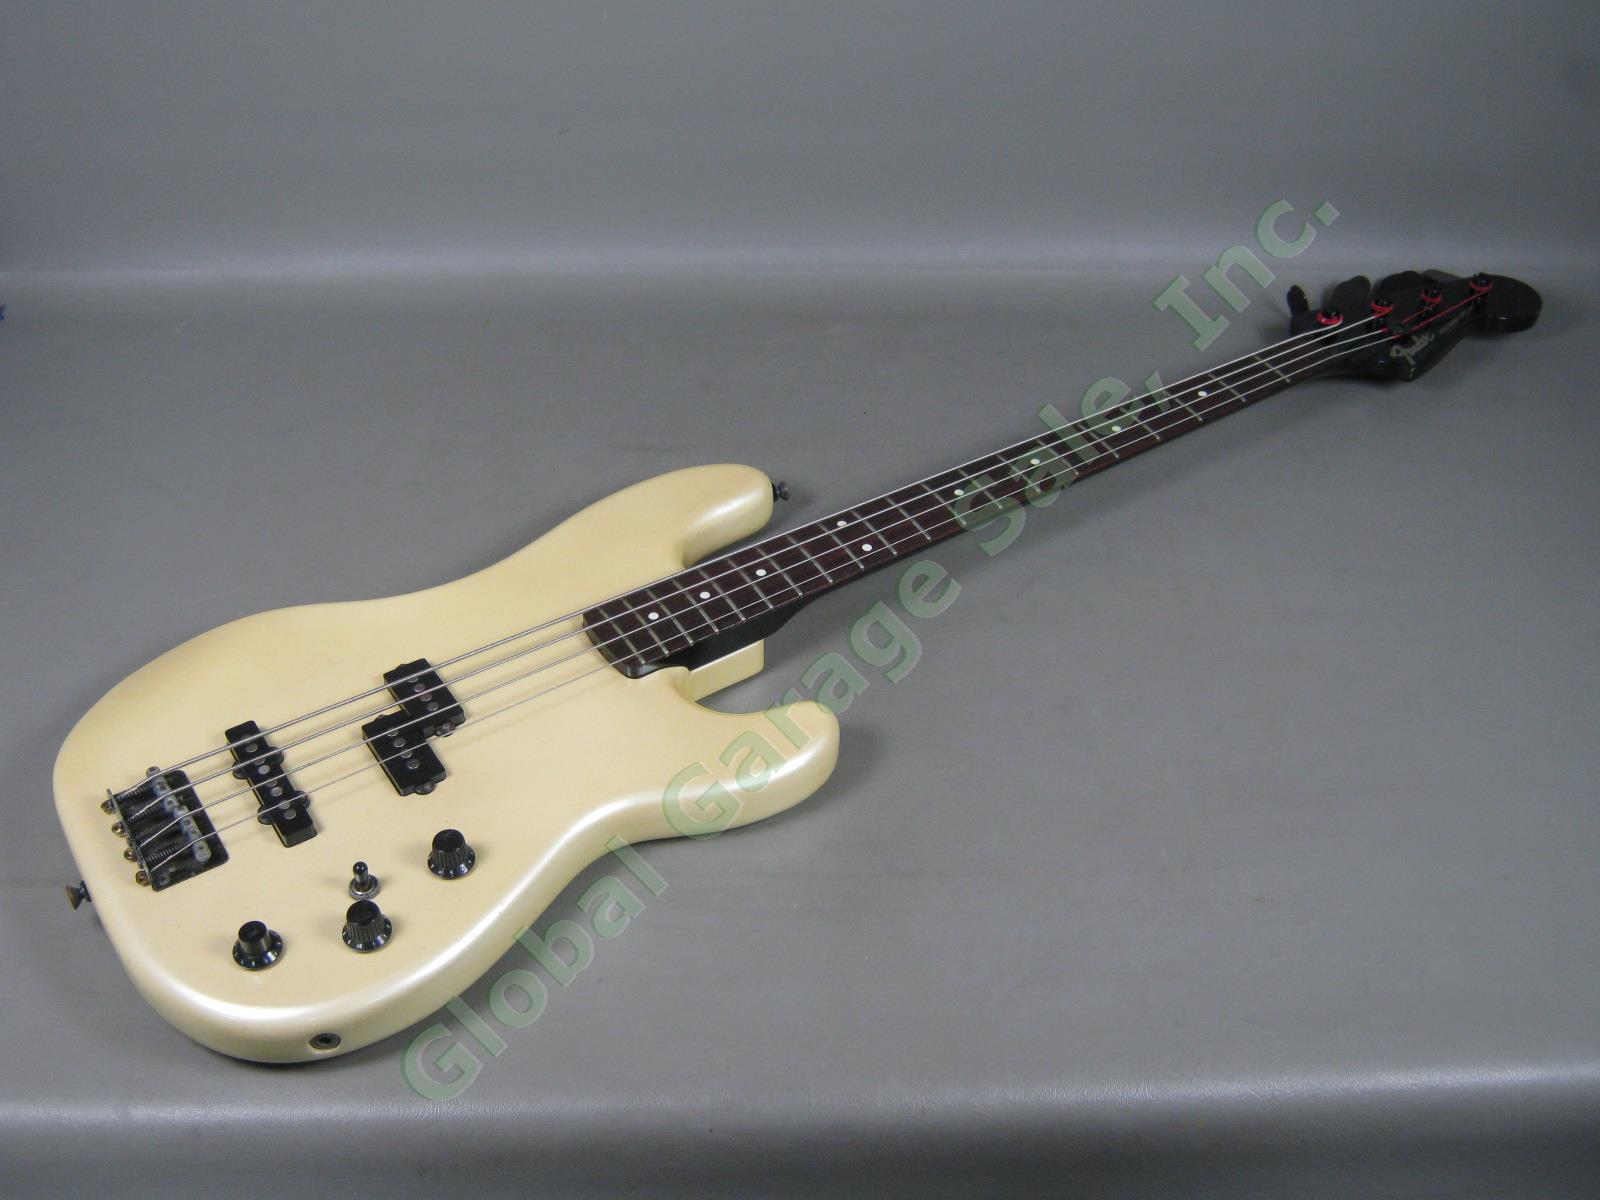 Vtg 1986 Fender Electric Jazz Bass Special MIJ One Owner! Exc Cond! No Reserve! 1